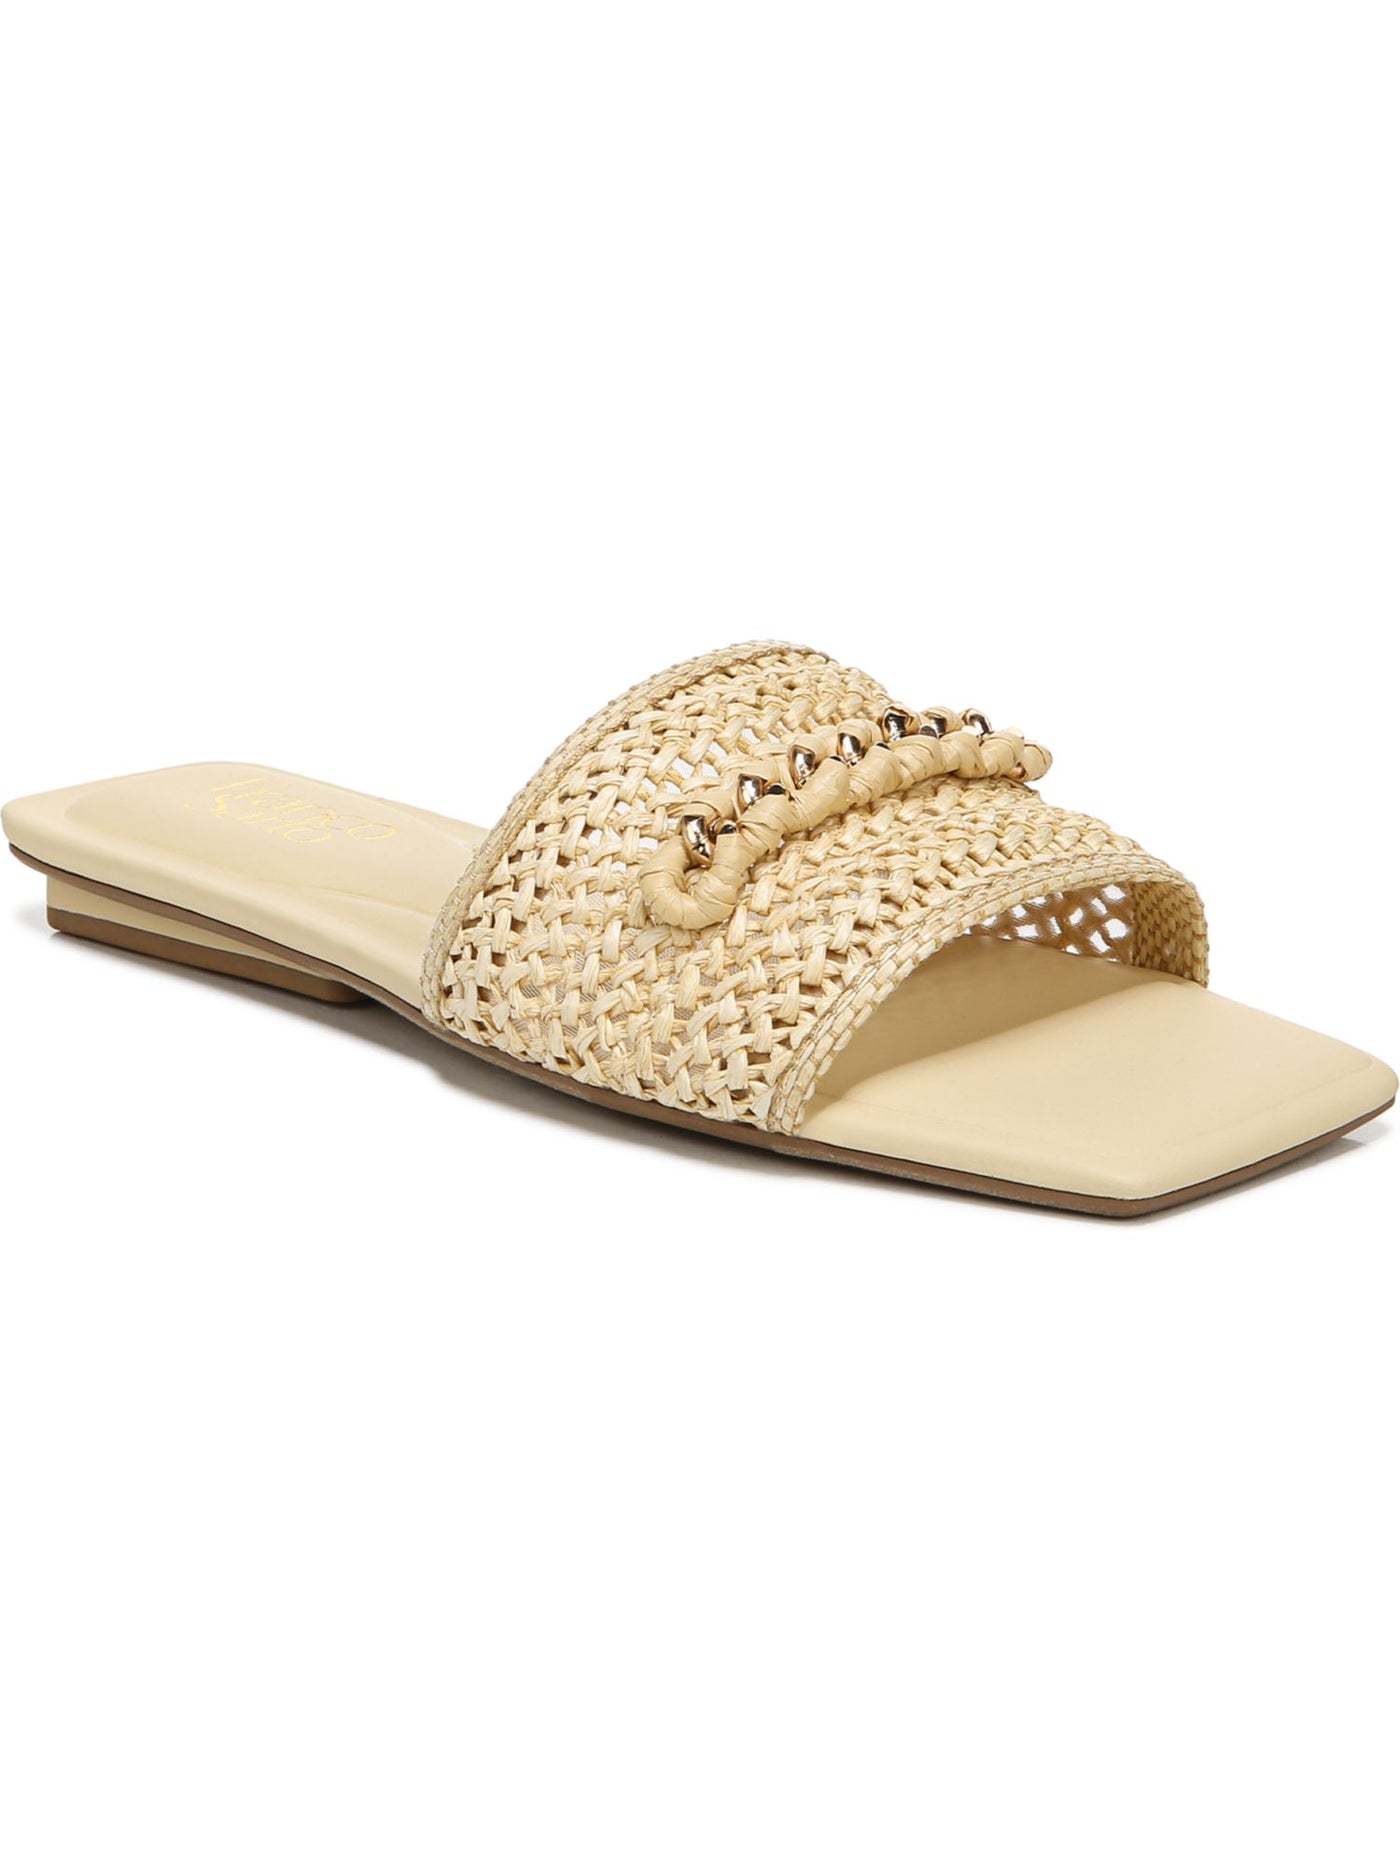 FRANCO SARTO Womens Beige Chain Cushioned Woven Caven Square Toe Slip On Slide Sandals Shoes 7 M